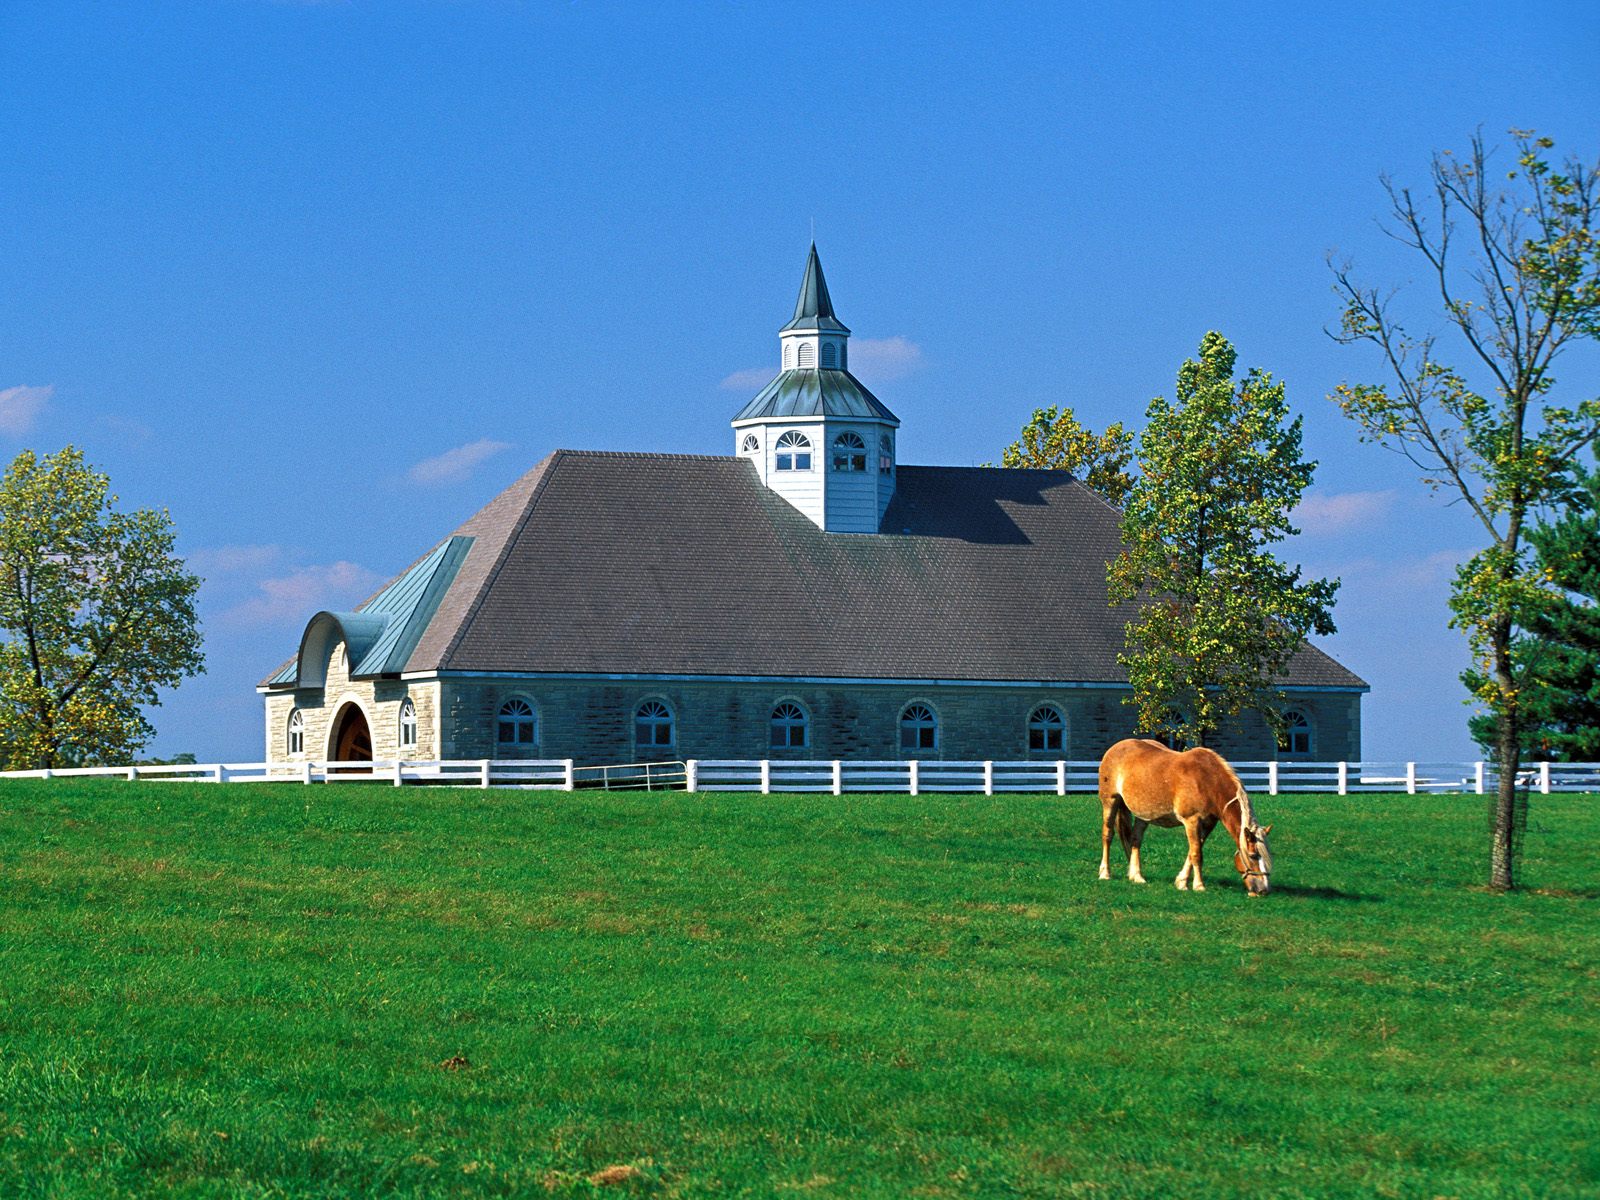  Farm Lexington Kentucky   Cool Backgrounds and Wallpapers for 1600x1200